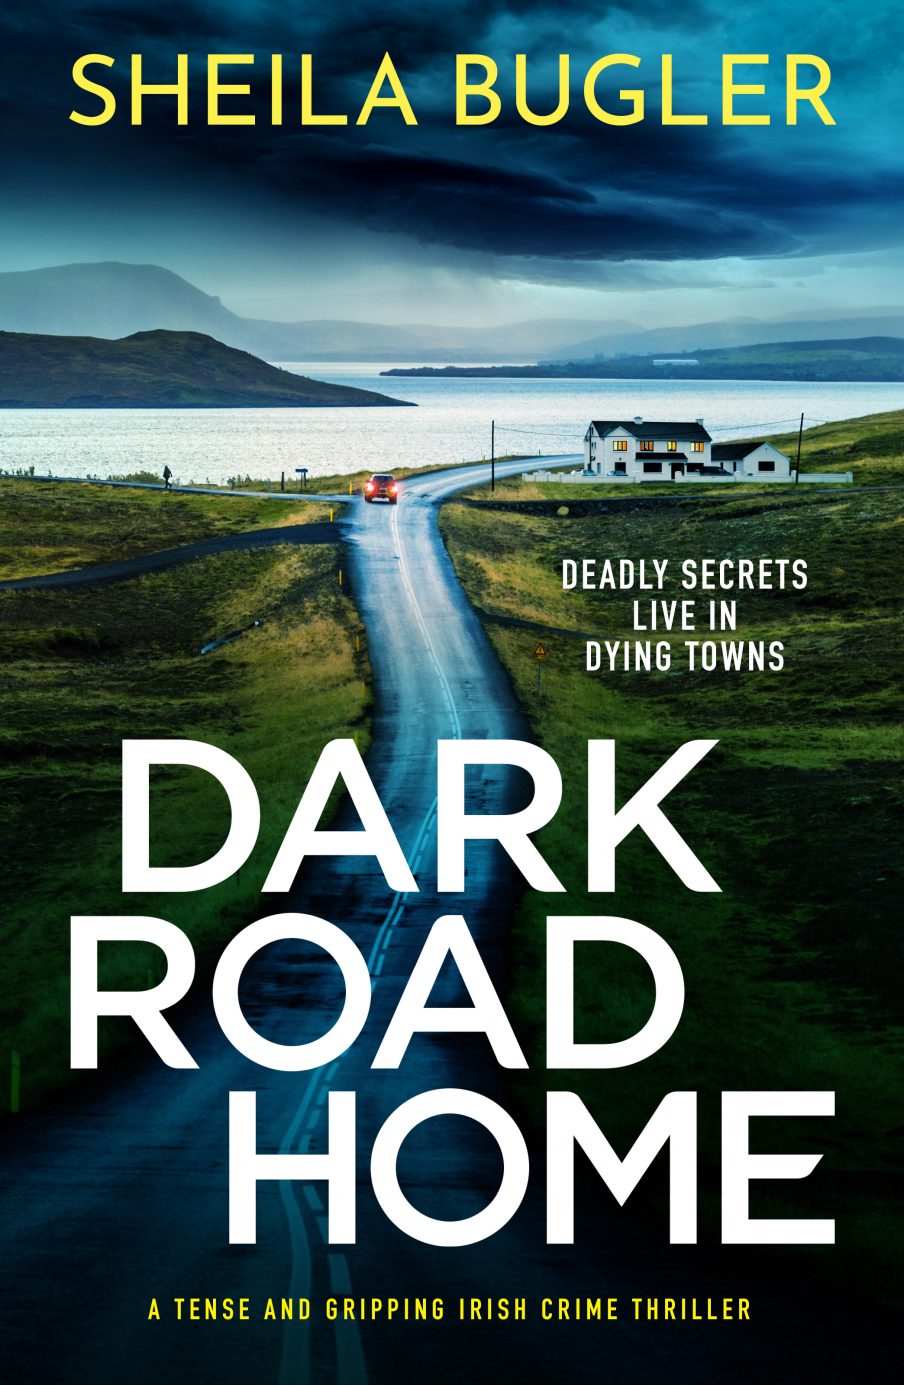 Image shows cover of Dark Road Home by Sheila Bugler